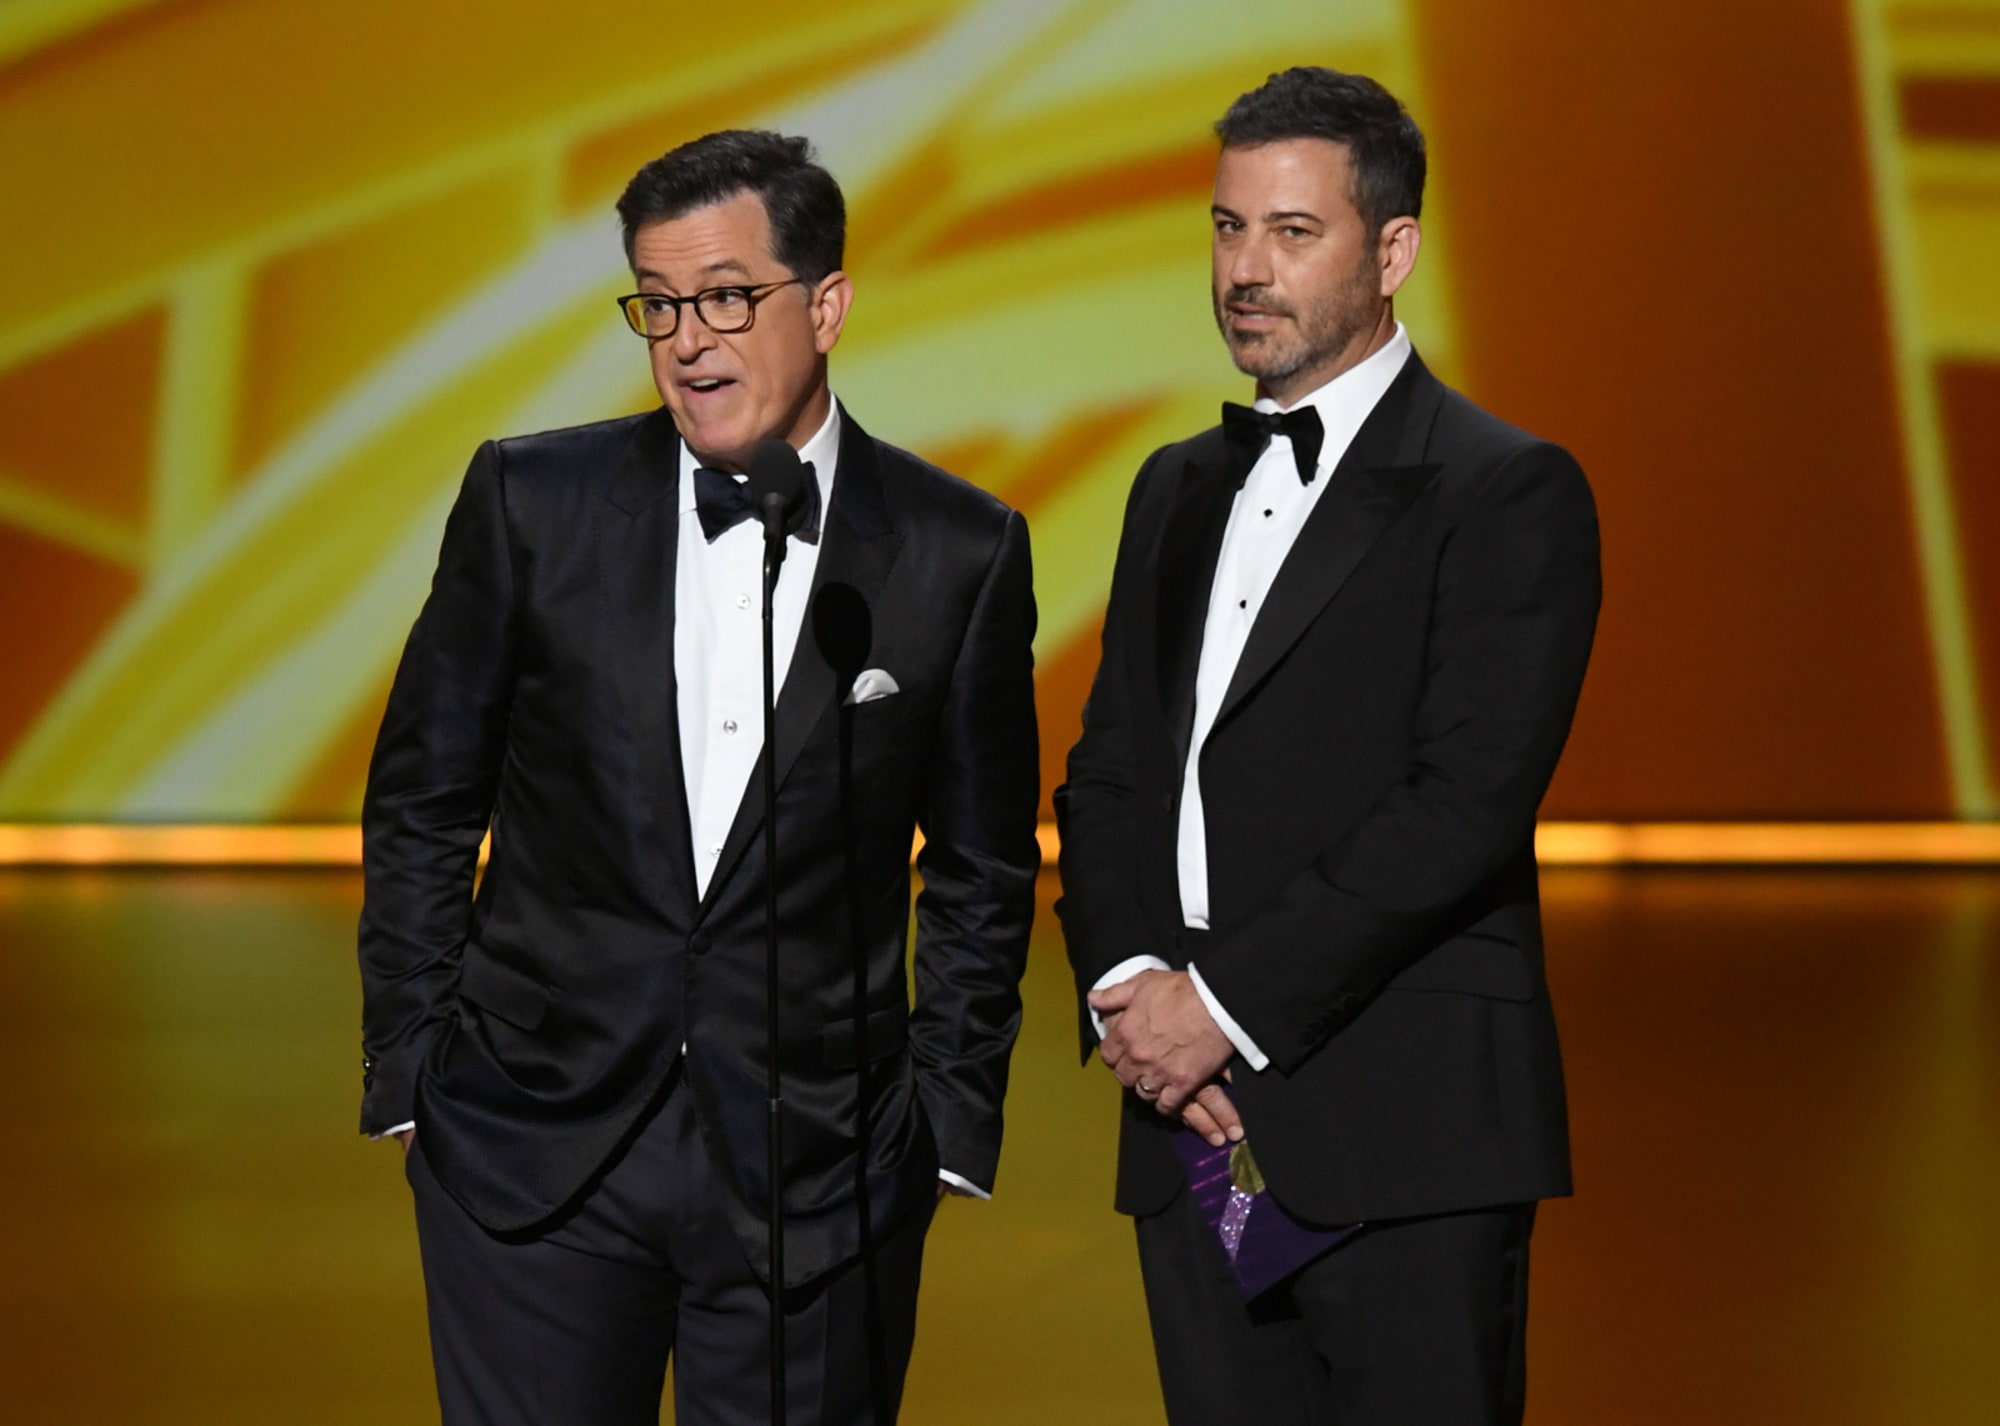 When do late night television shows return in 2020?